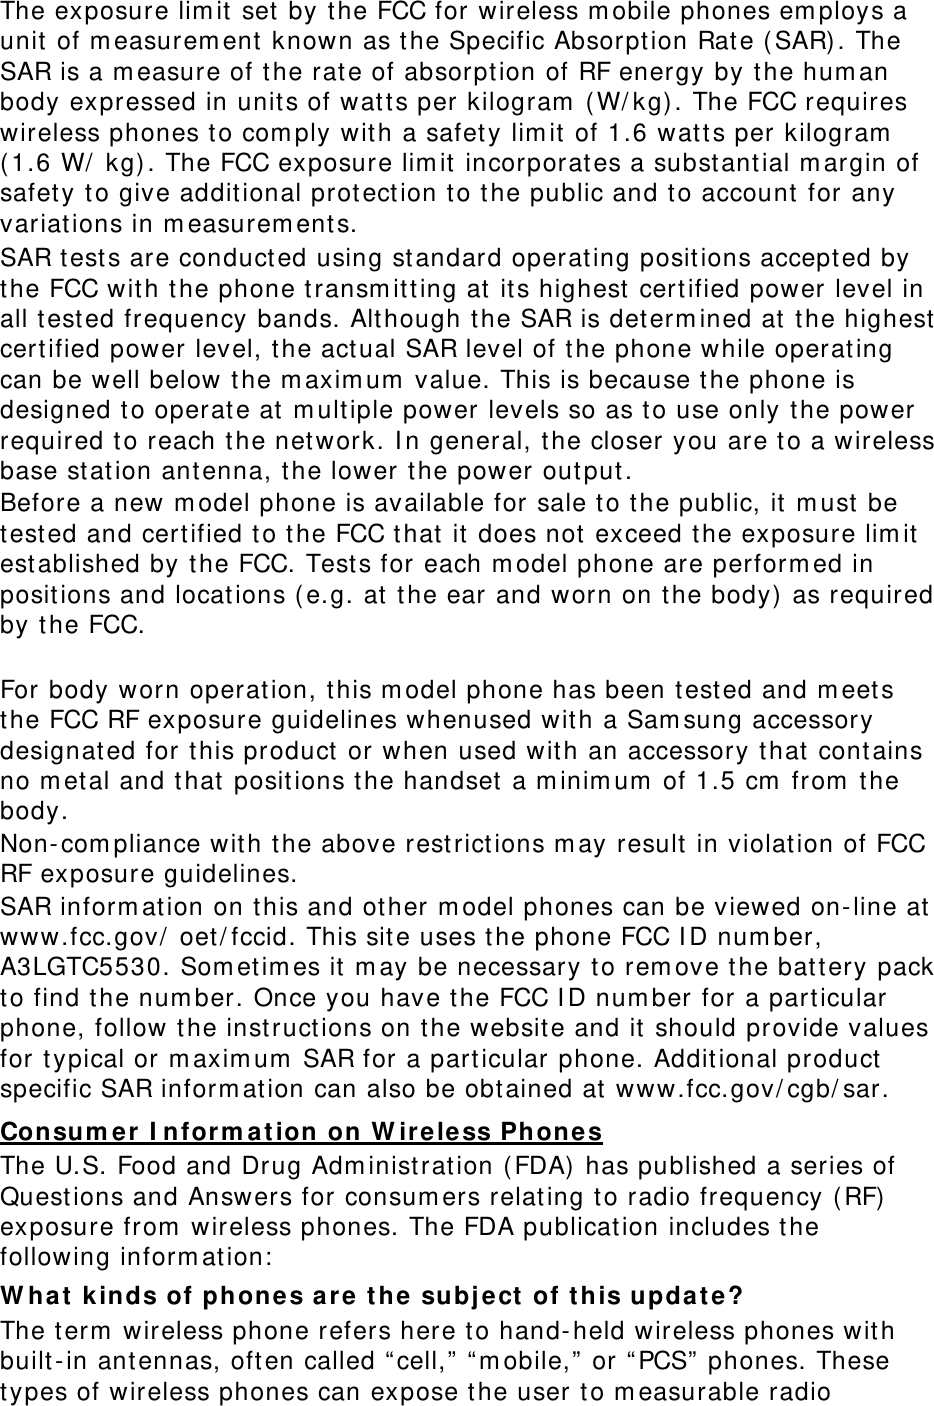 The exposure lim it set by the FCC for wireless m obile phones em ploys a unit of m easurem ent  known as the Specific Absorpt ion Rate ( SAR). The SAR is a m easure of t he rate of absorpt ion of RF energy by t he hum an body expressed in units of watts per kilogram  (W/ kg) . The FCC requires wireless phones t o com ply wit h a safety lim it  of 1.6 watt s per kilogram  ( 1.6 W/  kg) . The FCC exposure lim it incorporat es a subst antial m argin of safet y t o give additional protect ion t o t he public and t o account for any variations in m easurem ent s. SAR t est s are conducted using st andard operating positions accept ed by the FCC with t he phone t ransm itting at its highest  certified power level in all t ested frequency bands. Although t he SAR is det erm ined at the highest cert ified power level, the act ual SAR level of t he phone while operating can be well below the m axim um  value. This is because the phone is designed t o operate at m ultiple power levels so as to use only t he power required t o reach the network. I n general, t he closer you are t o a wireless base station ant enna, the lower t he power out put . Before a new m odel phone is available for sale t o the public, it m ust be test ed and certified t o the FCC that  it  does not exceed t he exposure lim it est ablished by the FCC. Tests for each m odel phone are perform ed in positions and locations ( e.g. at  t he ear and worn on the body) as required by t he FCC.      For body worn operation, this m odel phone has been t est ed and m eets the FCC RF exposure guidelines whenused with a Sam sung accessory designated for this product  or when used with an accessory that  cont ains no m et al and t hat posit ions the handset  a m inim um  of 1.5 cm  from  t he body.  Non- com pliance with t he above rest rict ions m ay result in violation of FCC RF exposure guidelines. SAR inform ation on t his and ot her m odel phones can be viewed on- line at  www.fcc.gov/  oet/ fccid. This site uses the phone FCC I D num ber, A3LGTC5530. Som et im es it  m ay be necessary to rem ove the bat tery pack to find the num ber. Once you have t he FCC I D num ber for a particular phone, follow t he instructions on t he websit e and it should provide values for t ypical or m axim um  SAR for a particular phone. Additional product  specific SAR inform ation can also be obtained at www.fcc.gov/ cgb/ sar. Consum er  I nfor m a t ion on W ire less Phone s The U.S. Food and Drug Adm inist ration ( FDA)  has published a series of Questions and Answers for consum ers relating t o radio frequency ( RF) exposure from  wireless phones. The FDA publication includes t he following inform at ion:  W ha t  kinds of phones ar e t he subj e ct  of t his update? The t erm  wireless phone refers here t o hand-held wireless phones with built-in ant ennas, often called “ cell,”  “ m obile,”  or “ PCS”  phones. These types of wireless phones can expose t he user t o m easurable radio 